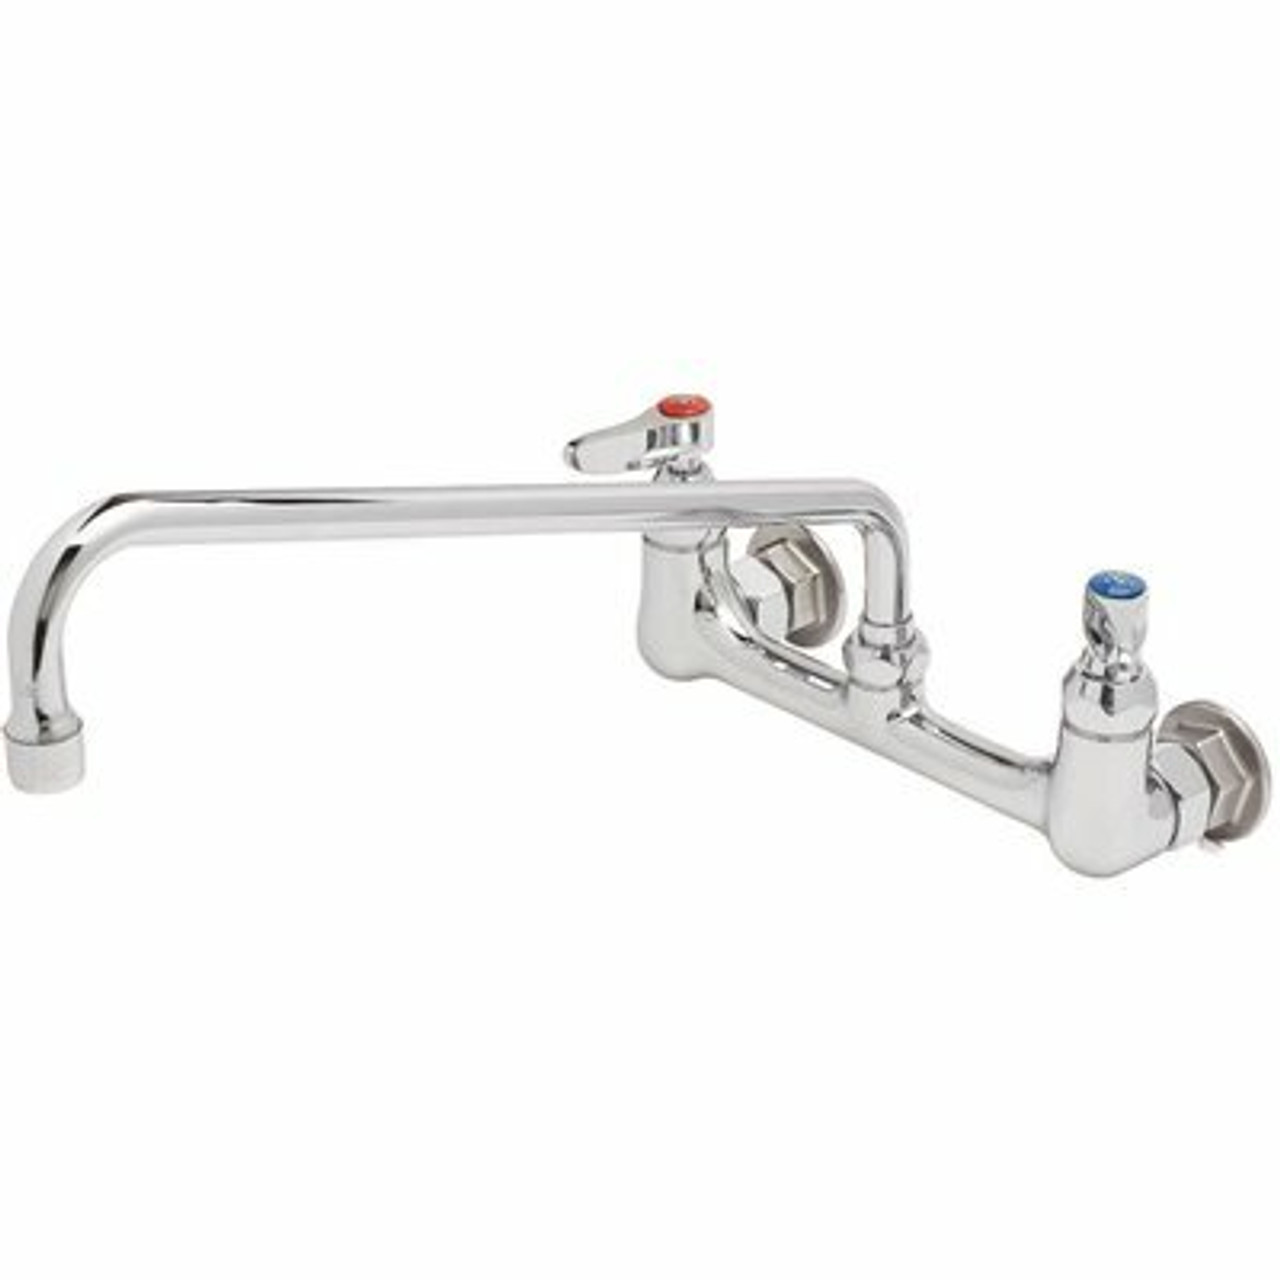 T&S Commercial 2-Handle Kitchen Faucet With Lever Handles In Polished Chrome